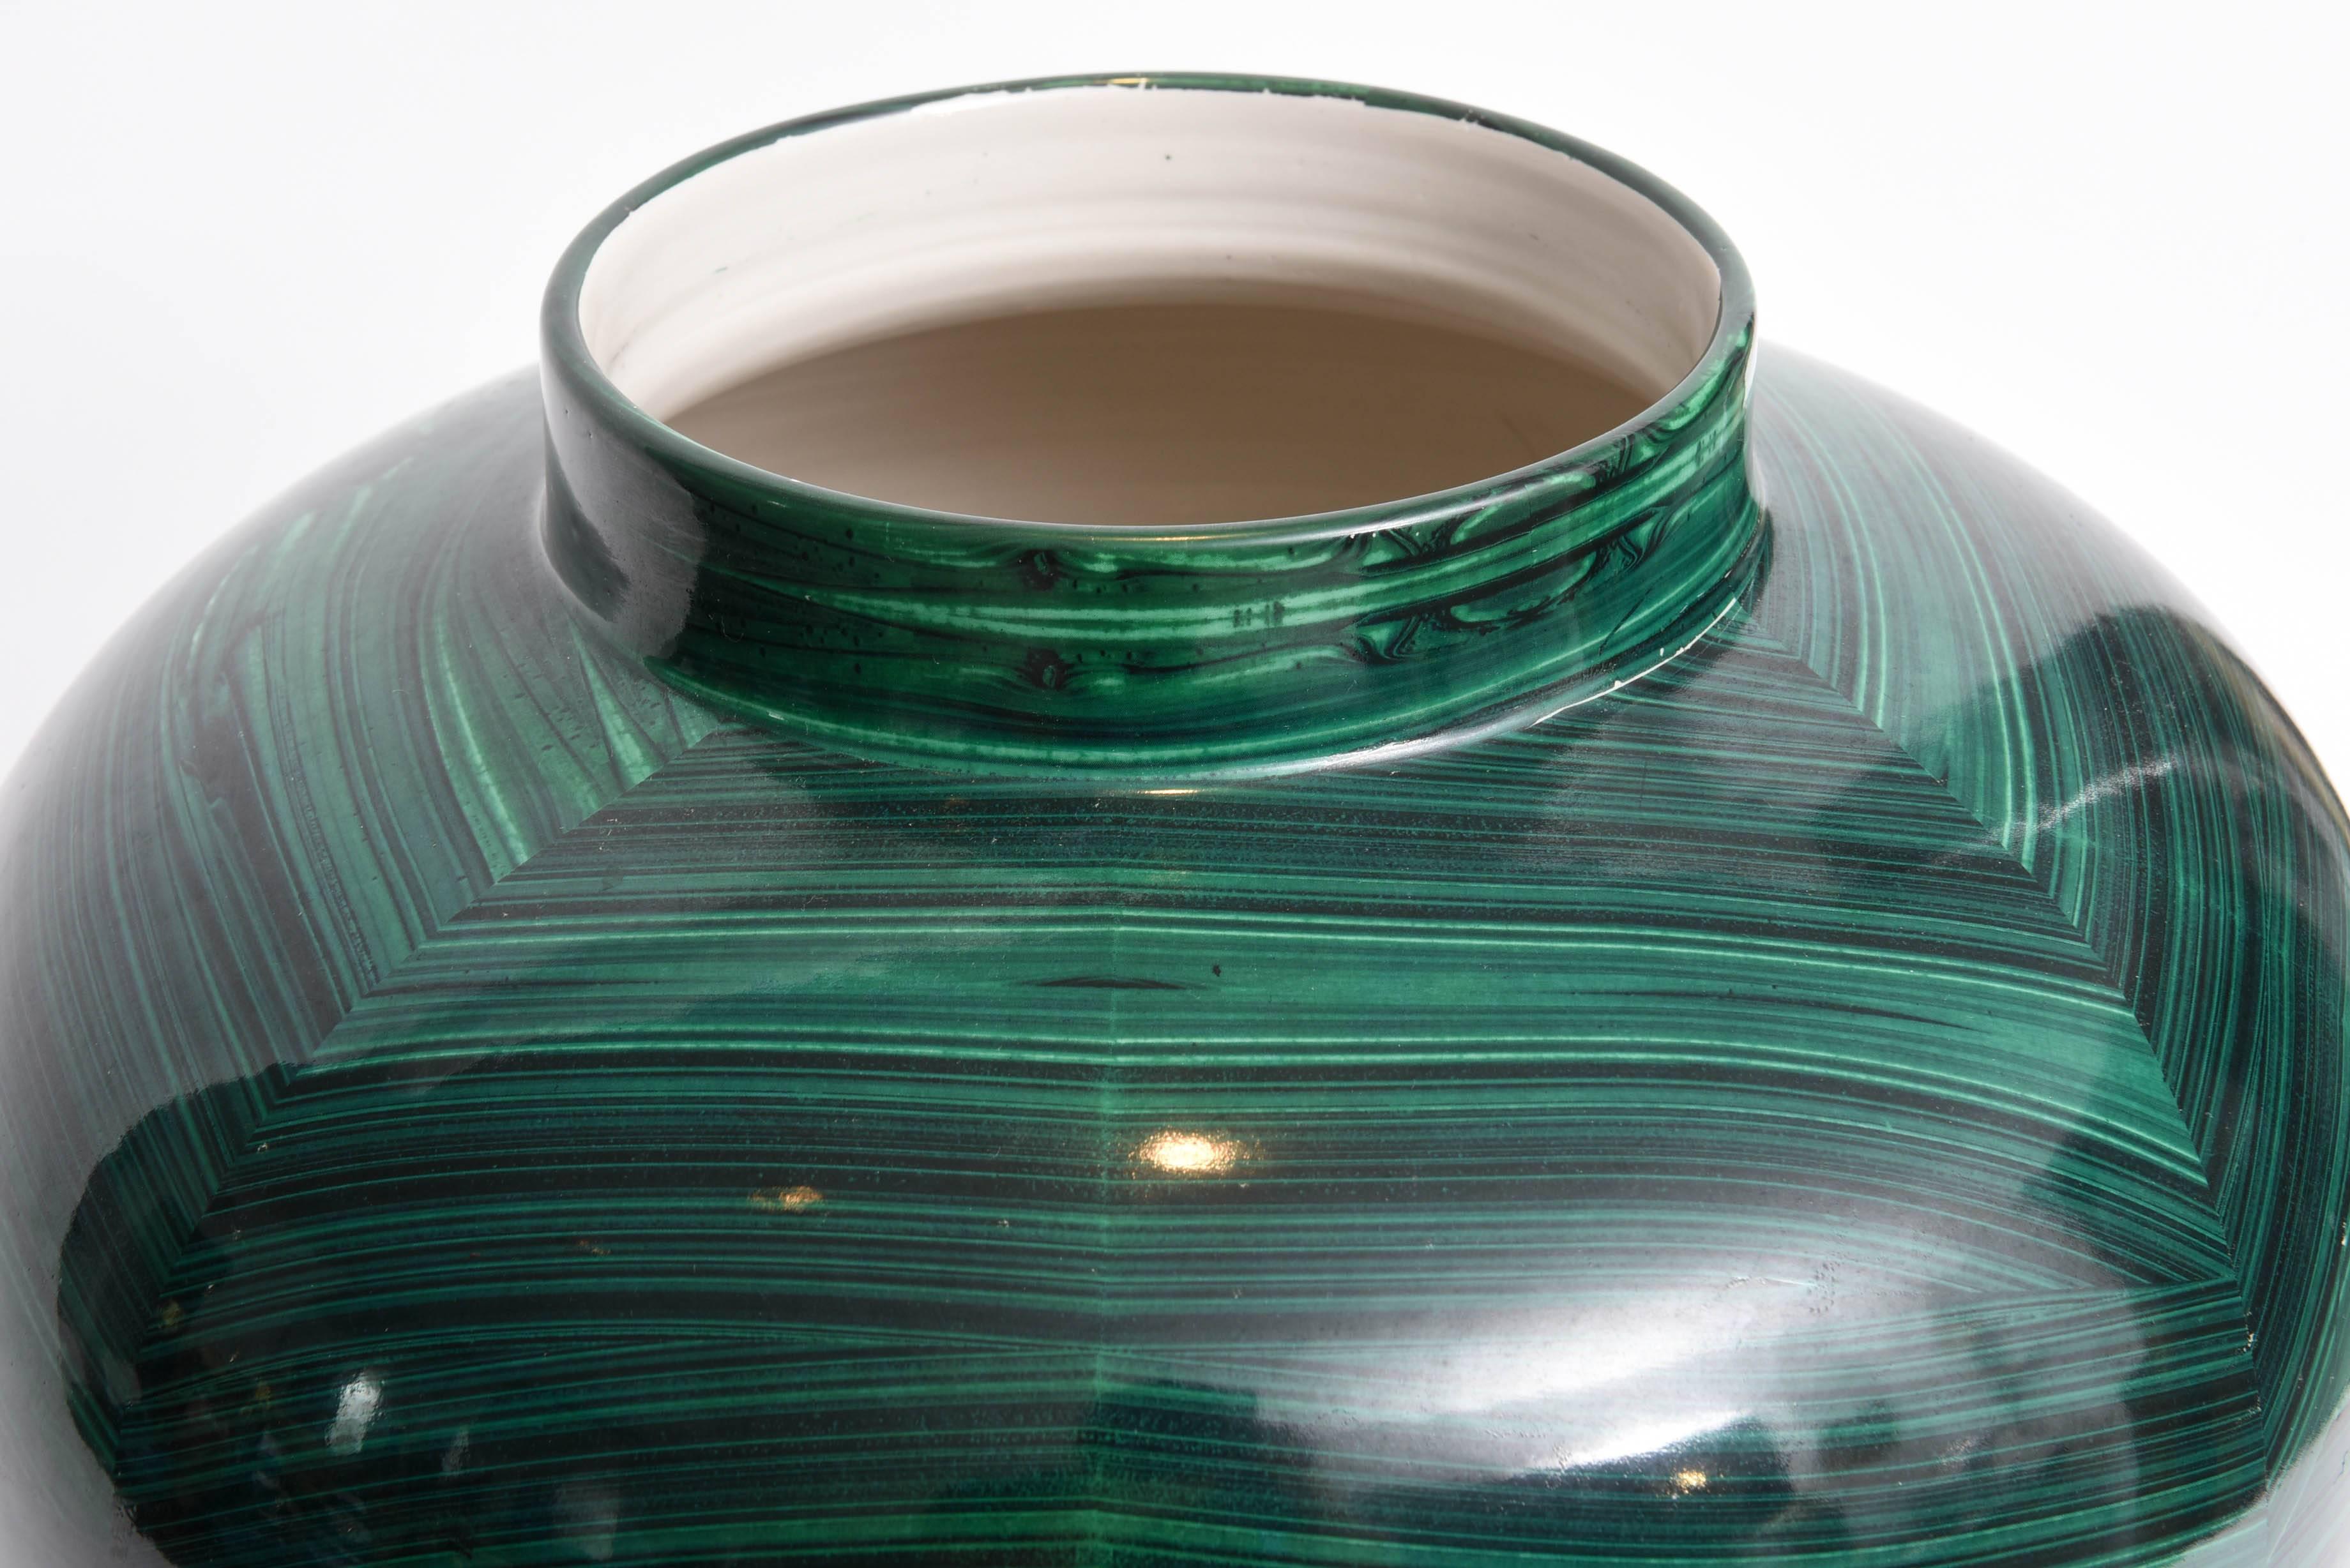 Marked on bottom:   B Ceramiche per Tommaso Barbi  Made in Italy

The vase is designed to suggest the joining of butterflied pieces of malachite.  The overall effect is visually stunning.